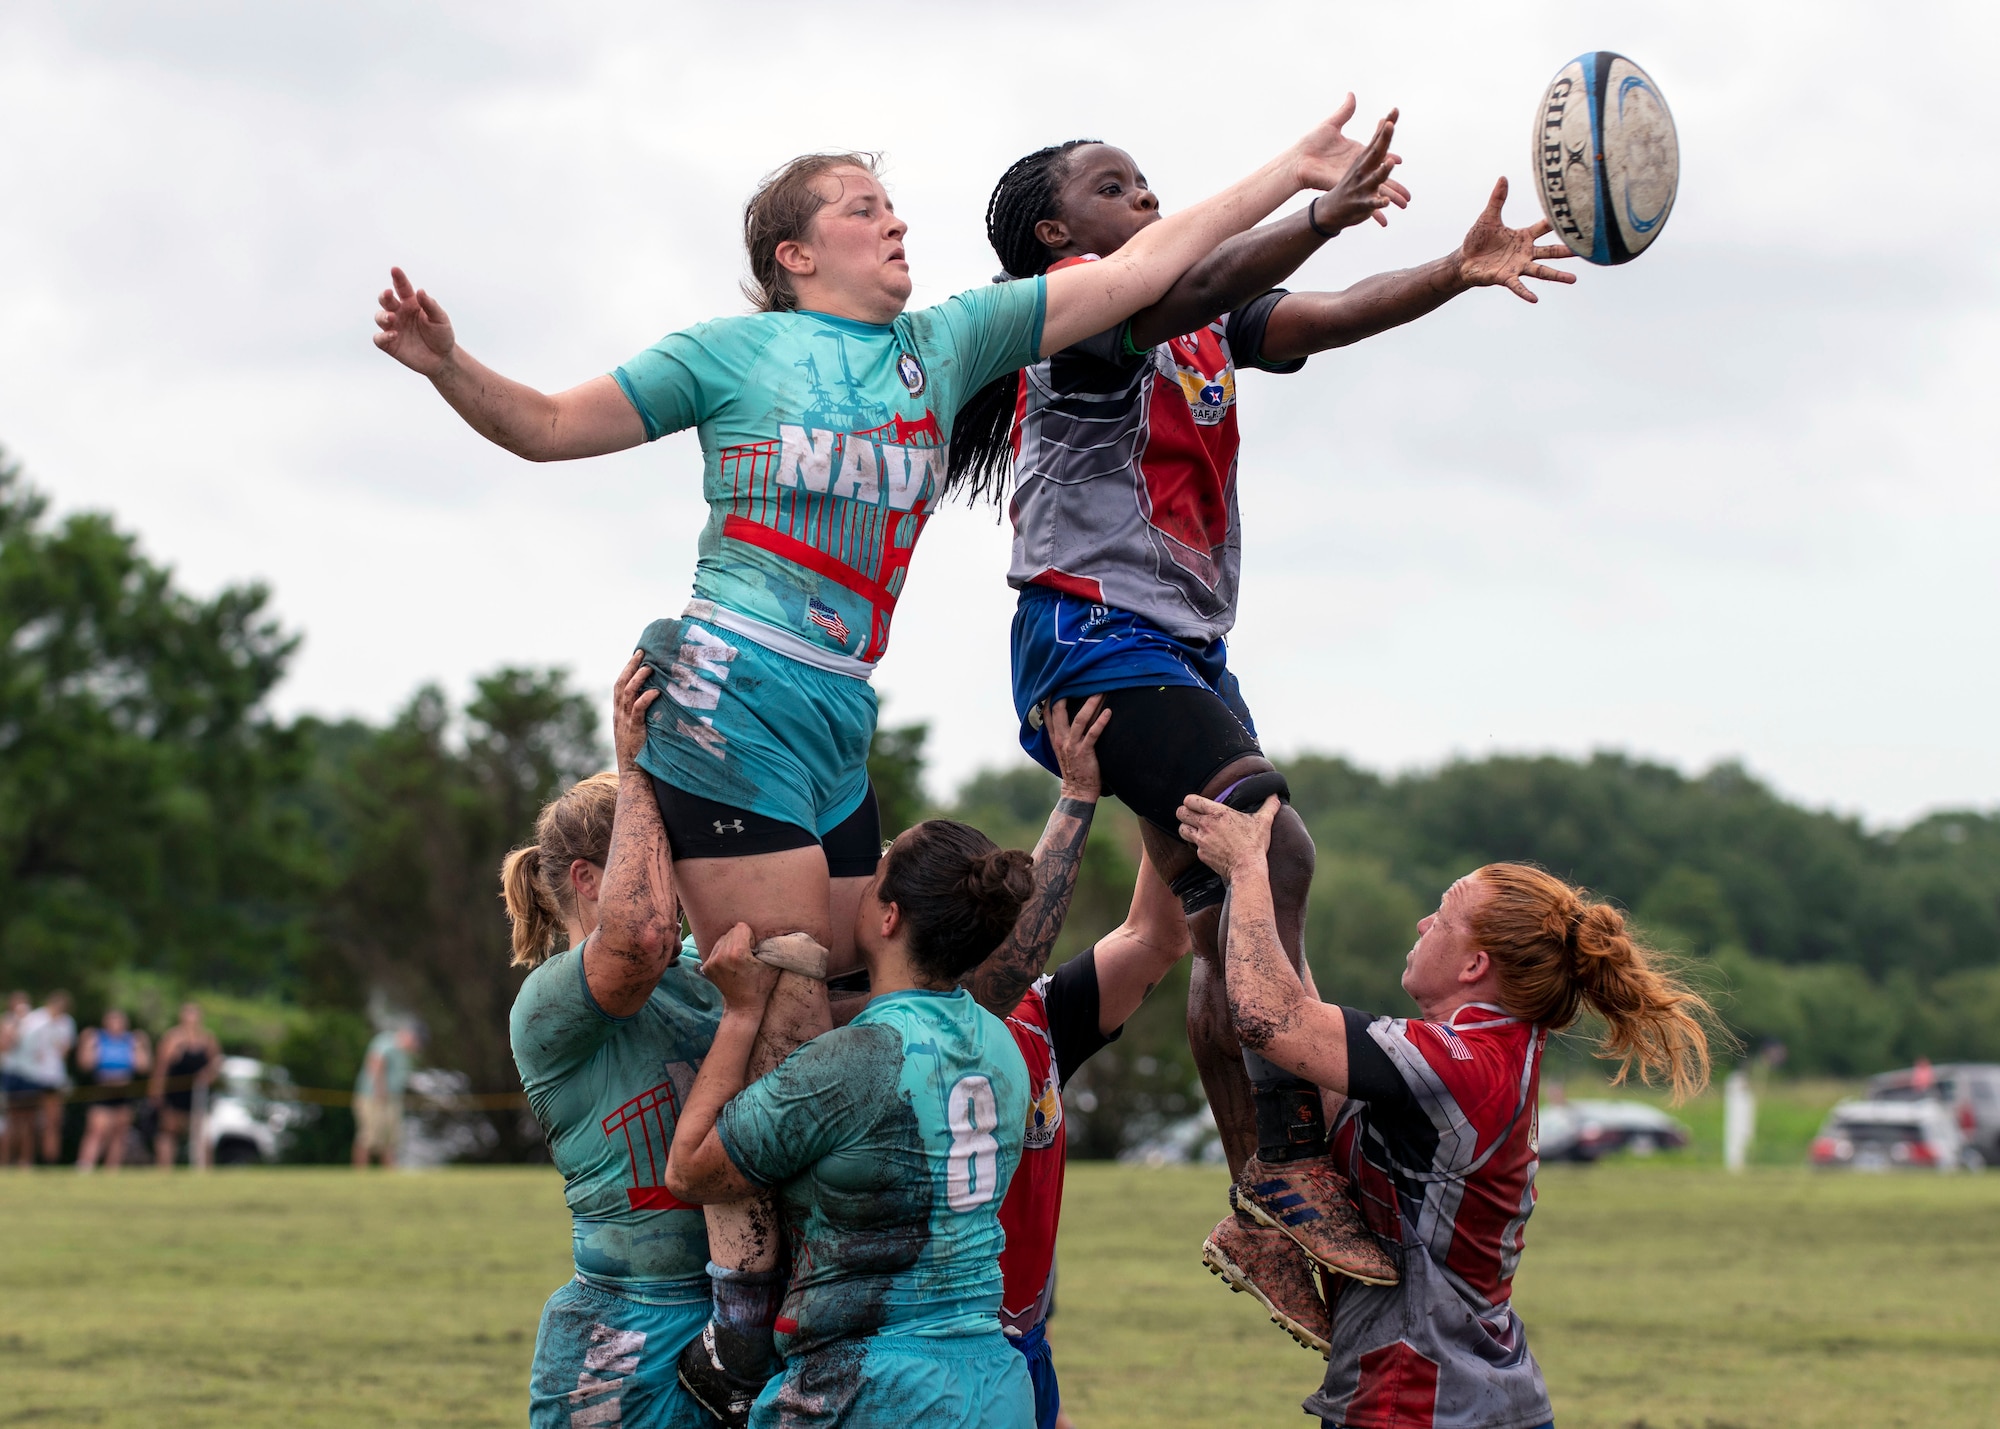 U.S. Air Force and U.S. Navy rugby players perform a lineout